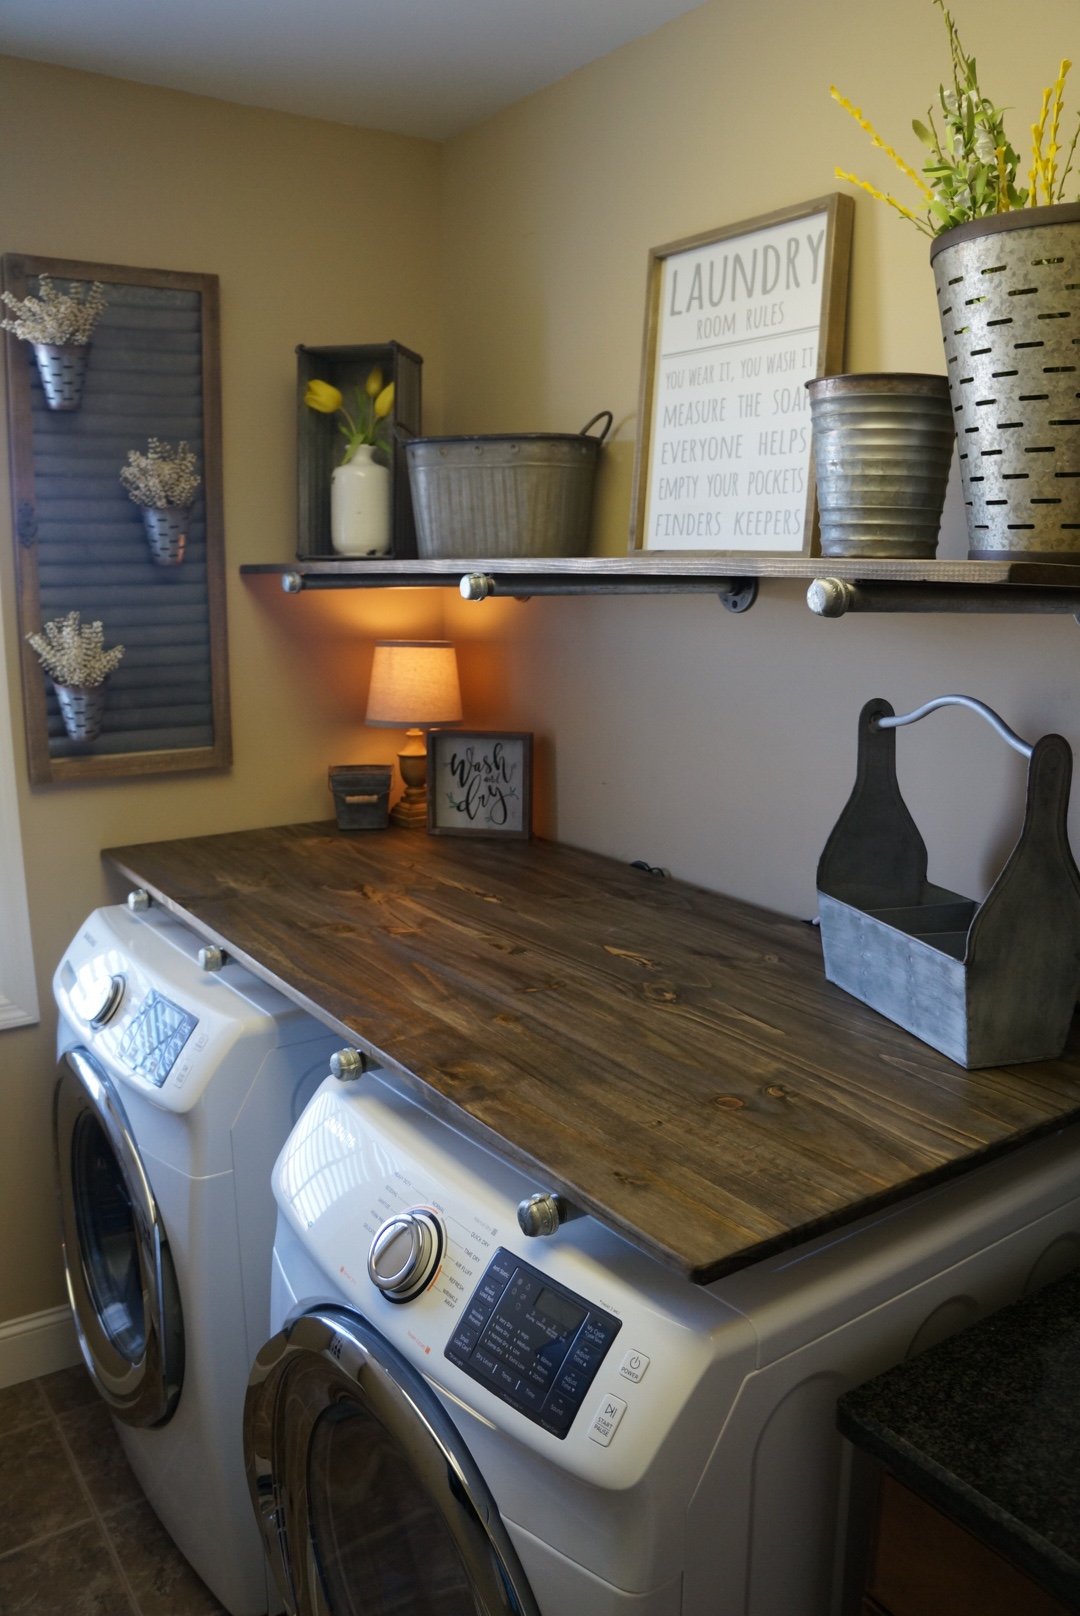 DIY Laundry Room Solutions for the Rustic Home| Laundry Room, Laundry Room Decor, DIY Laundry Room, Laundry Room Organization, Laundry Room Organization, How to Decorate Your Laundry Room, Popular Pin